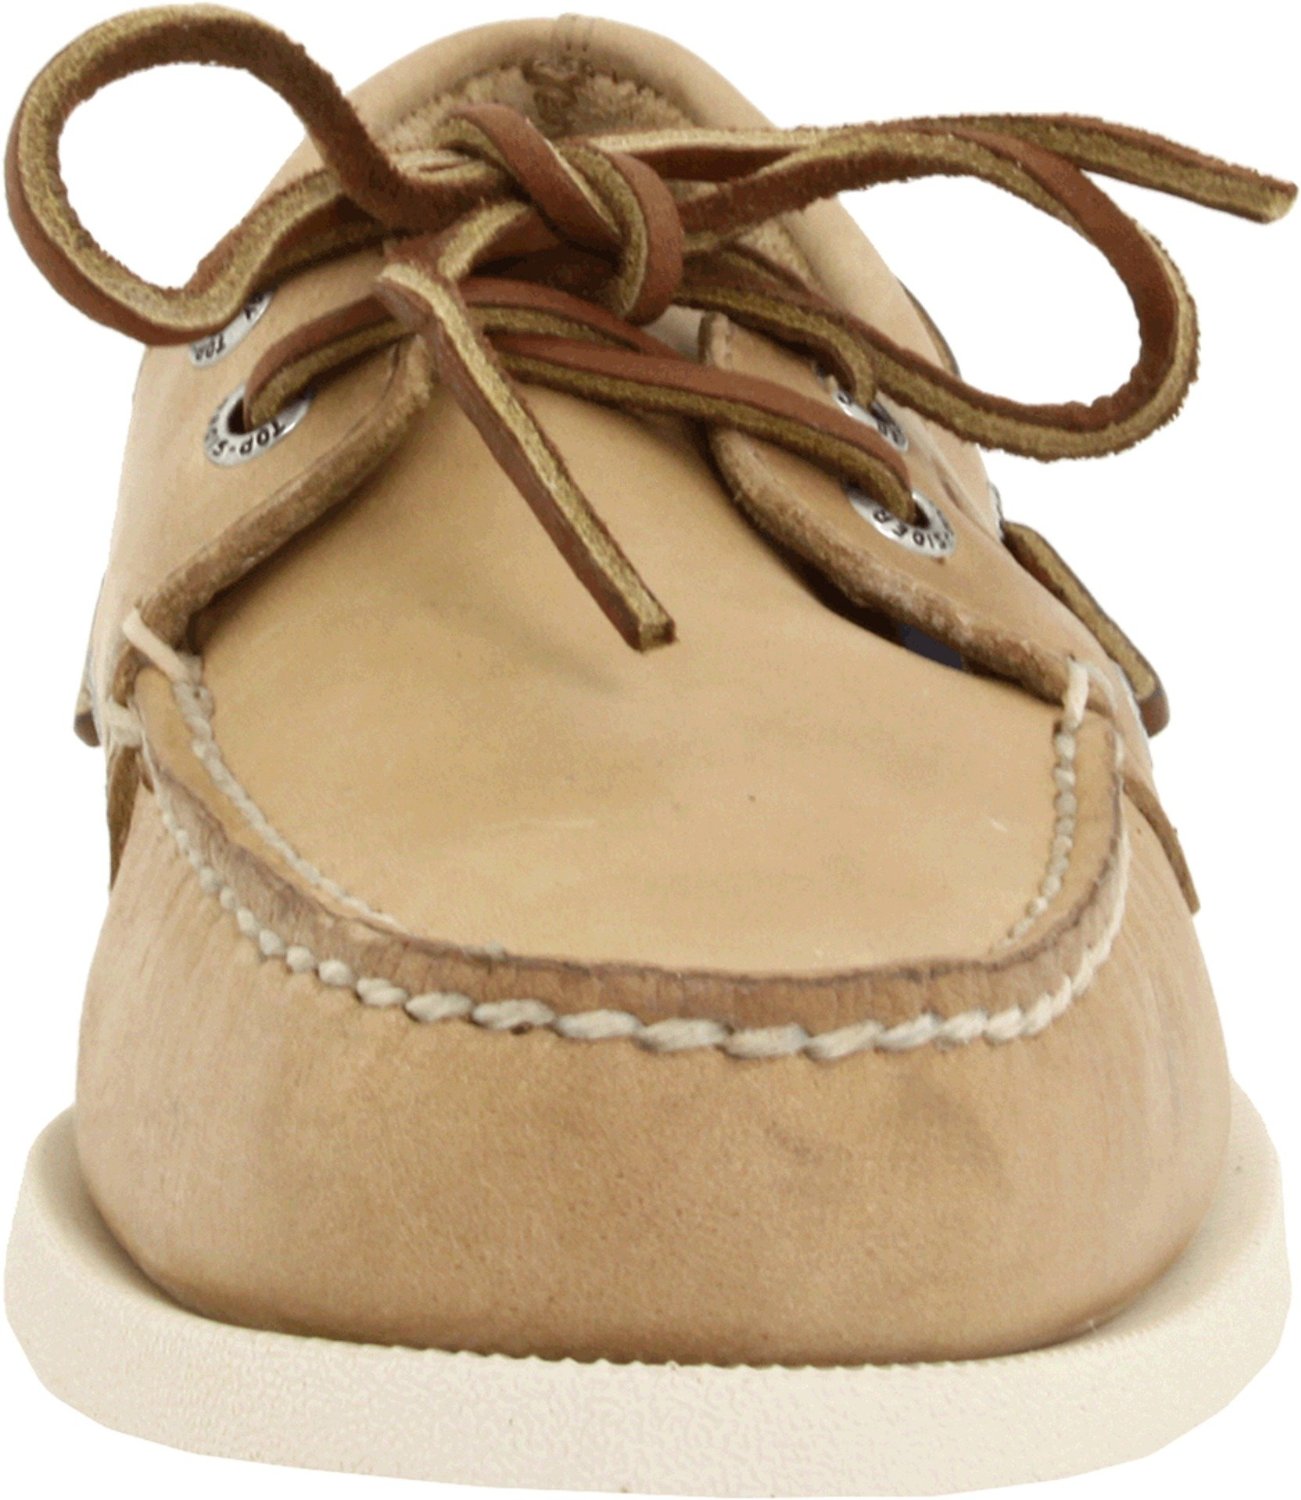 Sperry Top-Sider Authentic Originals Mens Boat Shoes from $59.99